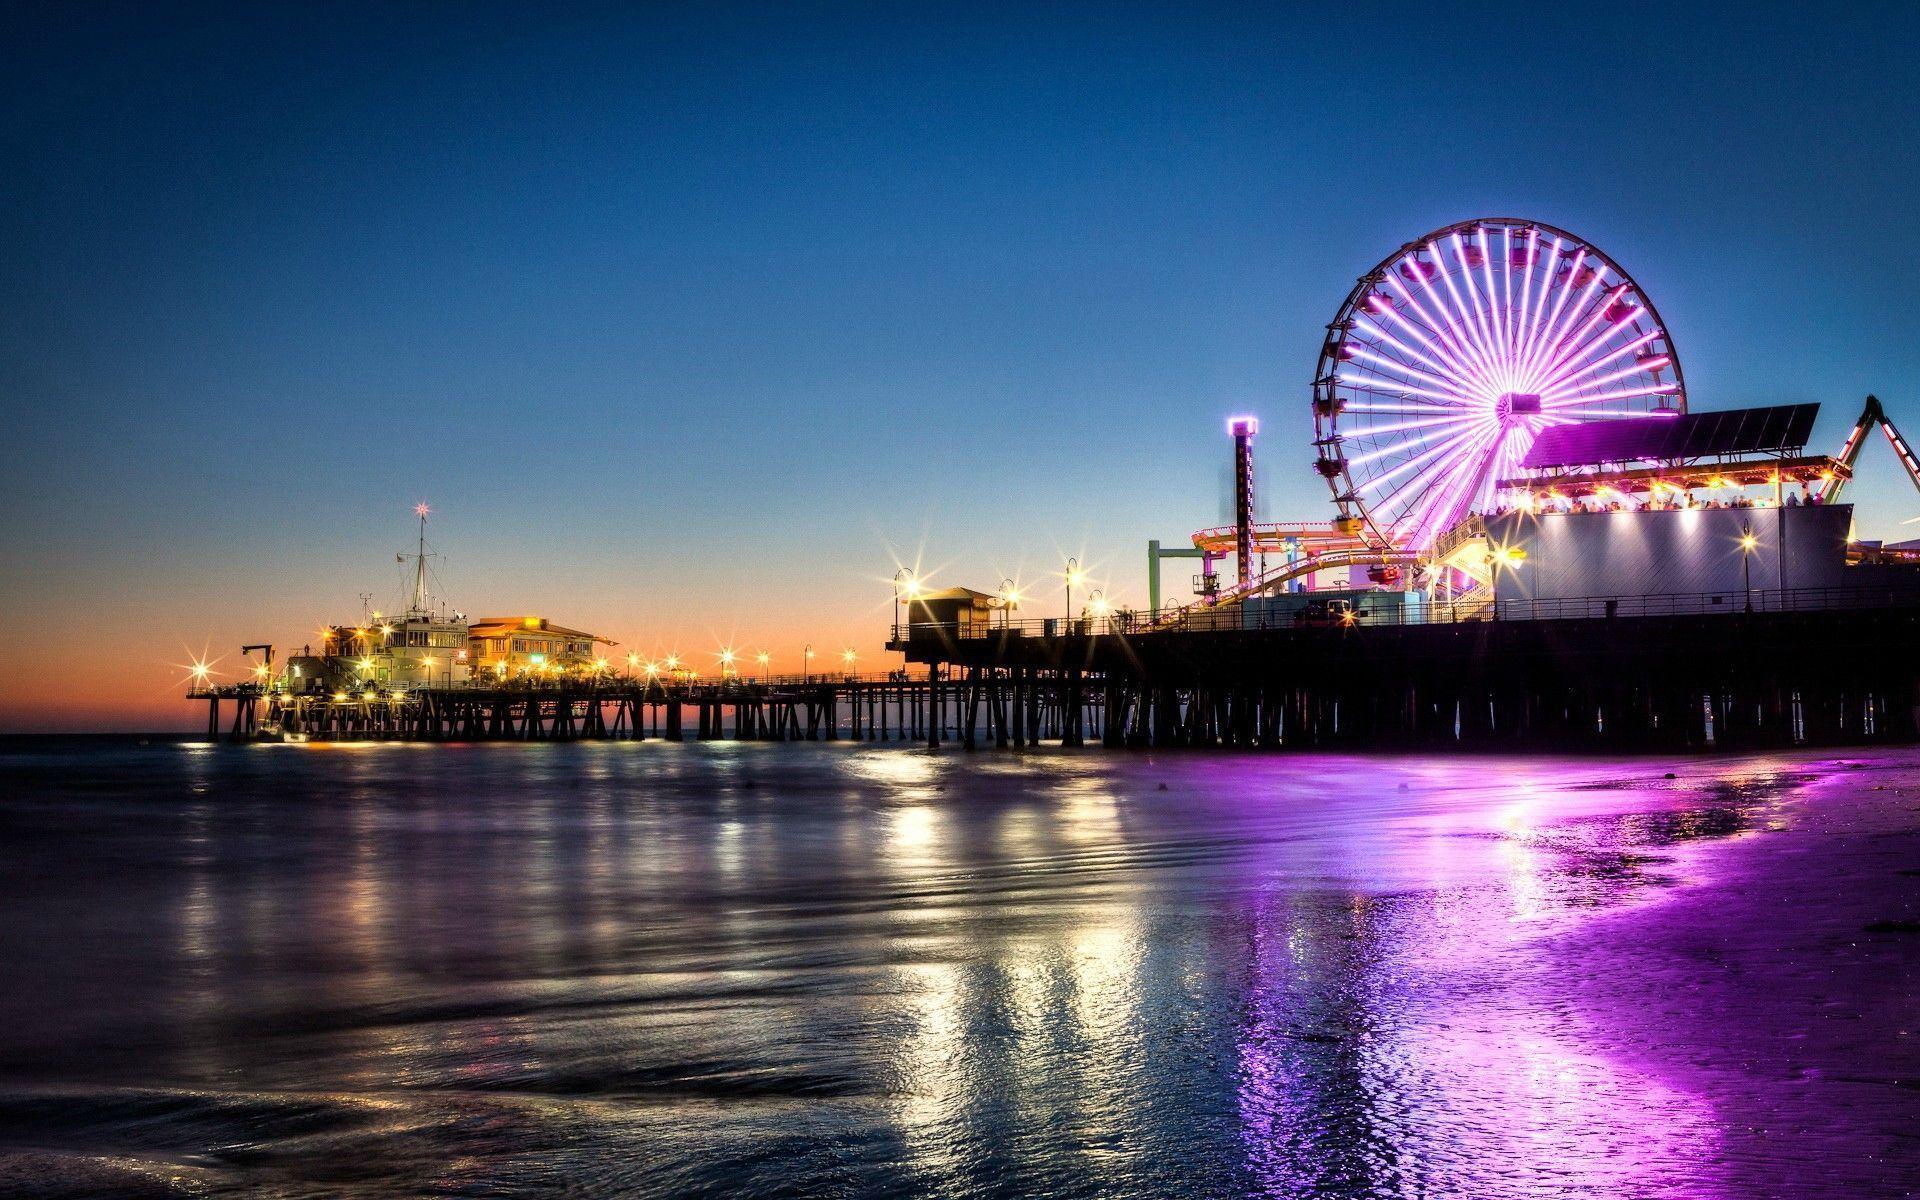 This is the Santa Monica Pier most summer nights